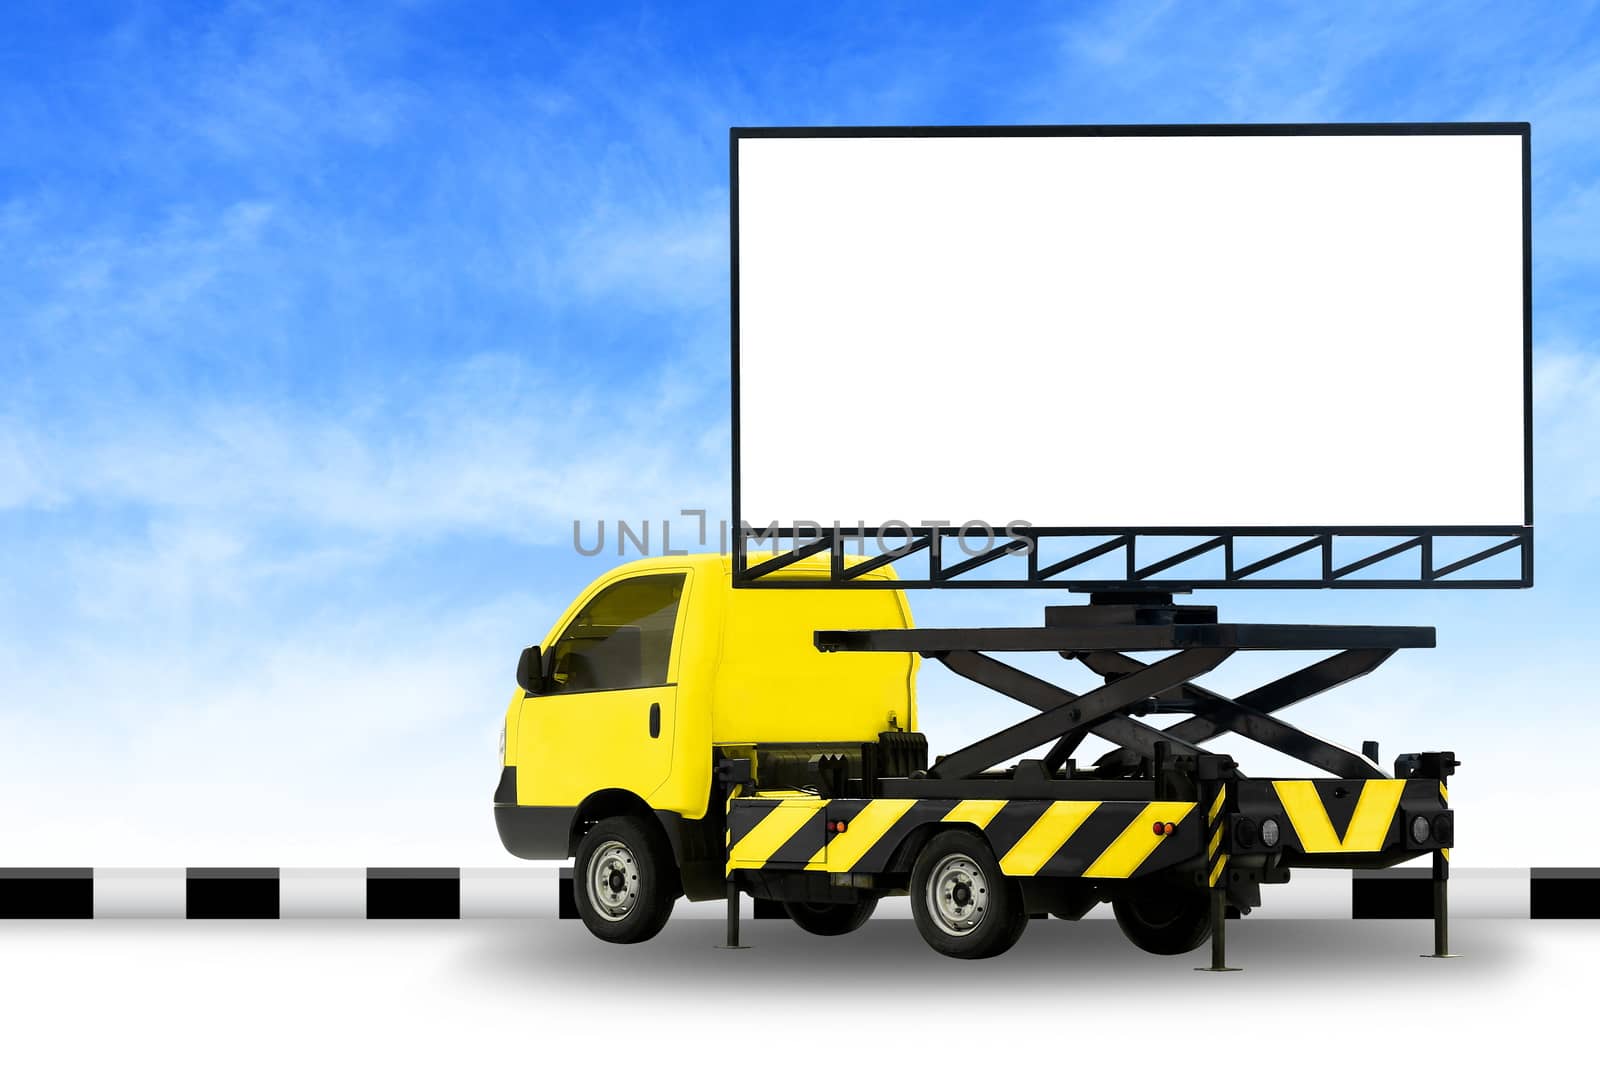 Billboard blank on car yellow truck LED panel for sign Advertising isolated on background sky, Large banner and billboard Roadside for an advertisement large